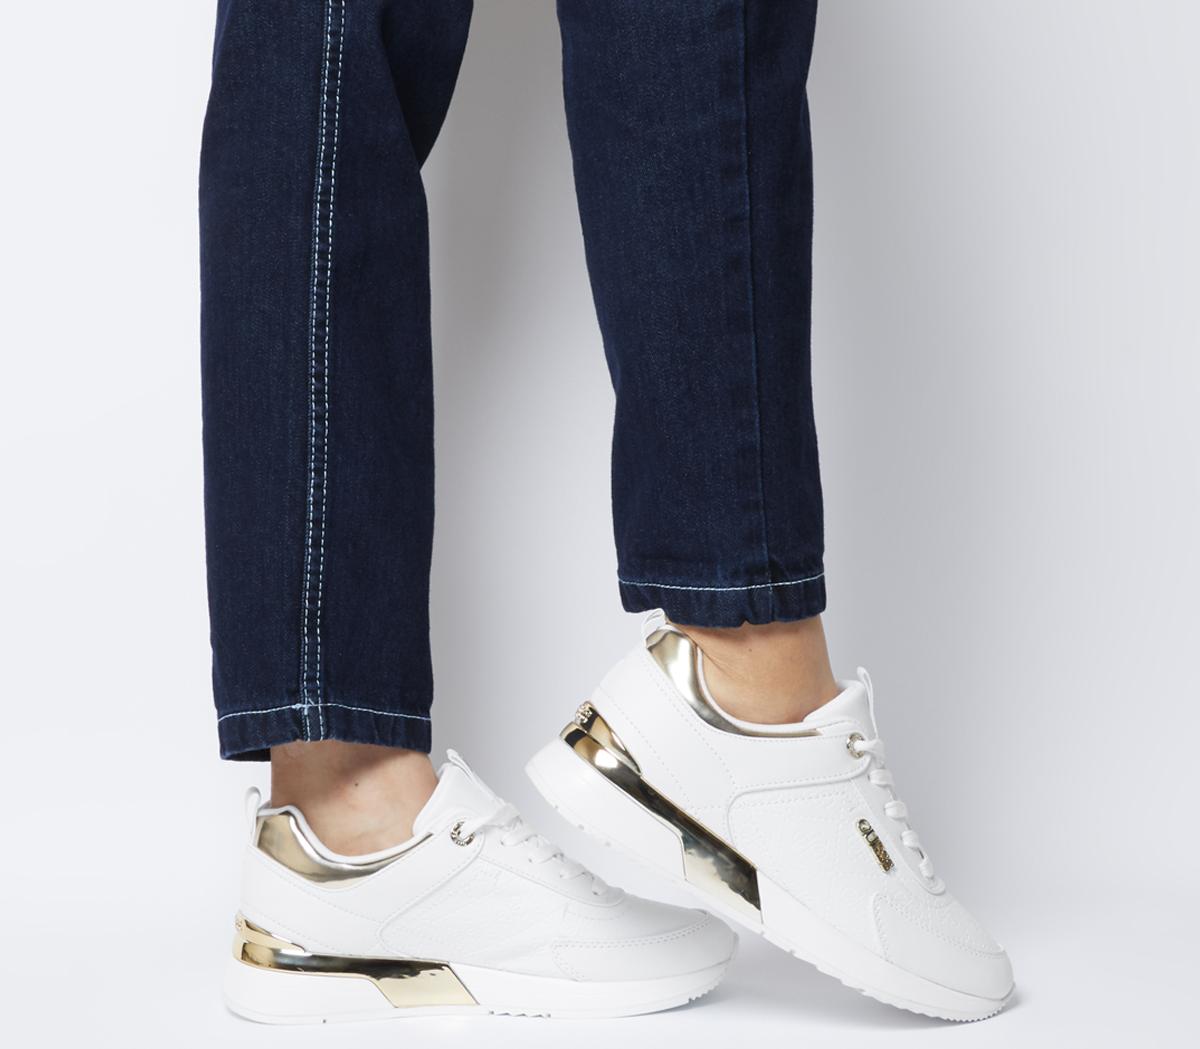 Guess Marlyn Sneakers White Gold - Flats